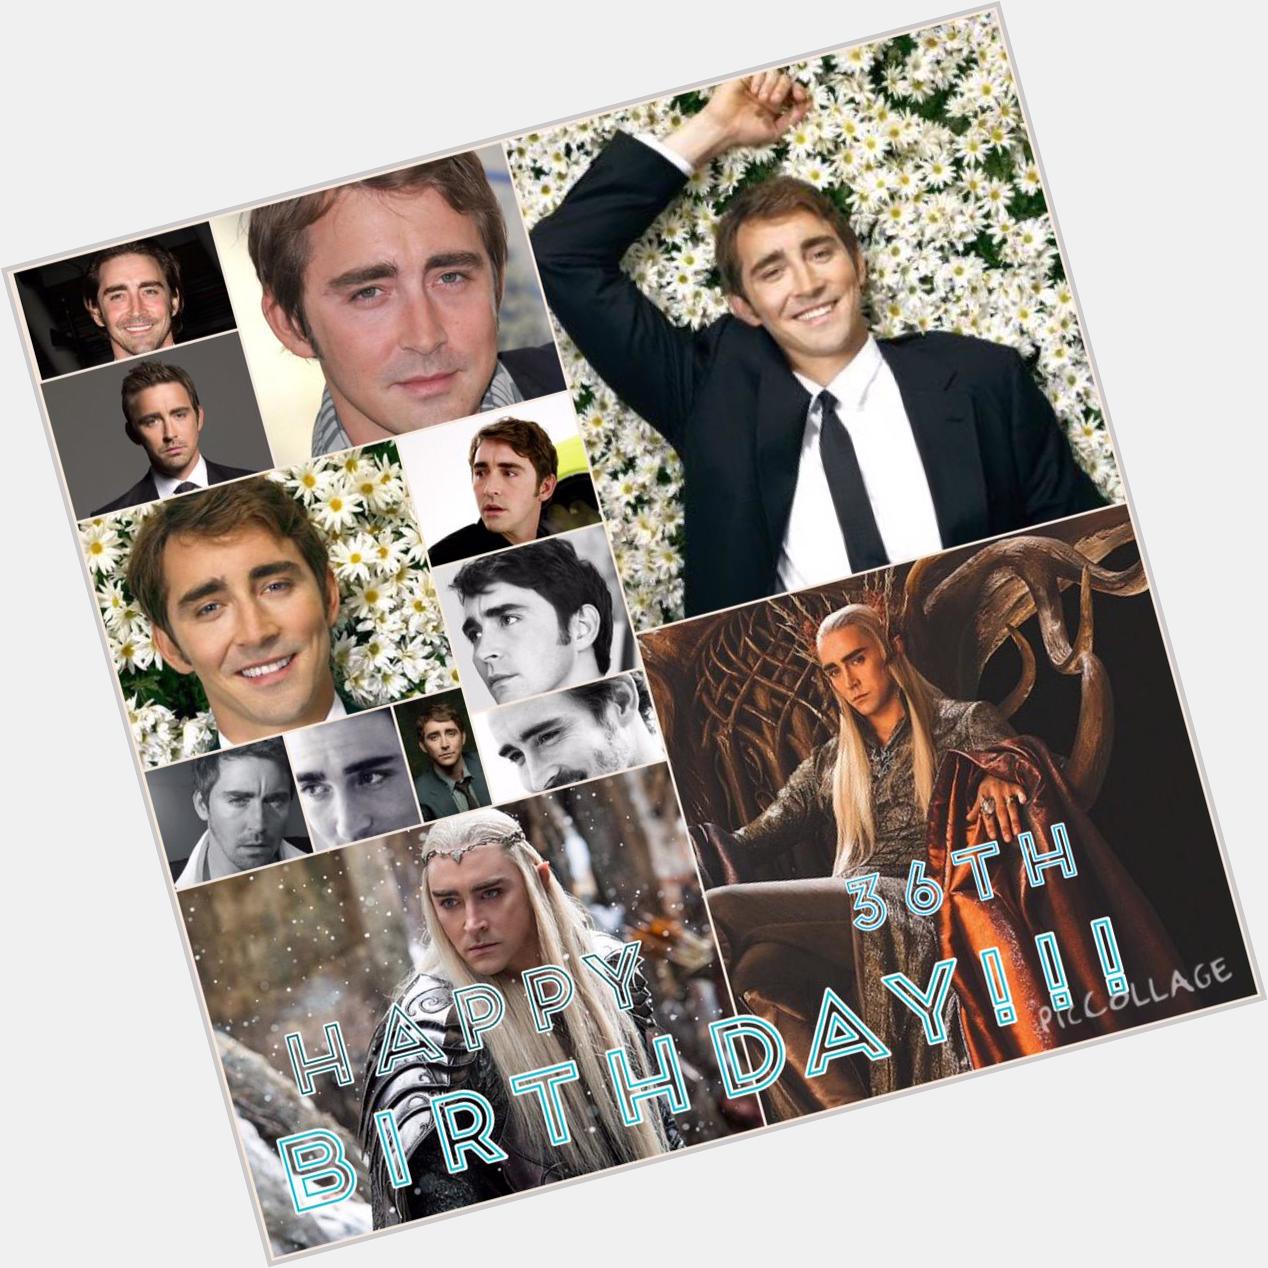 Happy 36th Birthday to most amazing actor in the world - LEE PACE. Enjoy every second                       